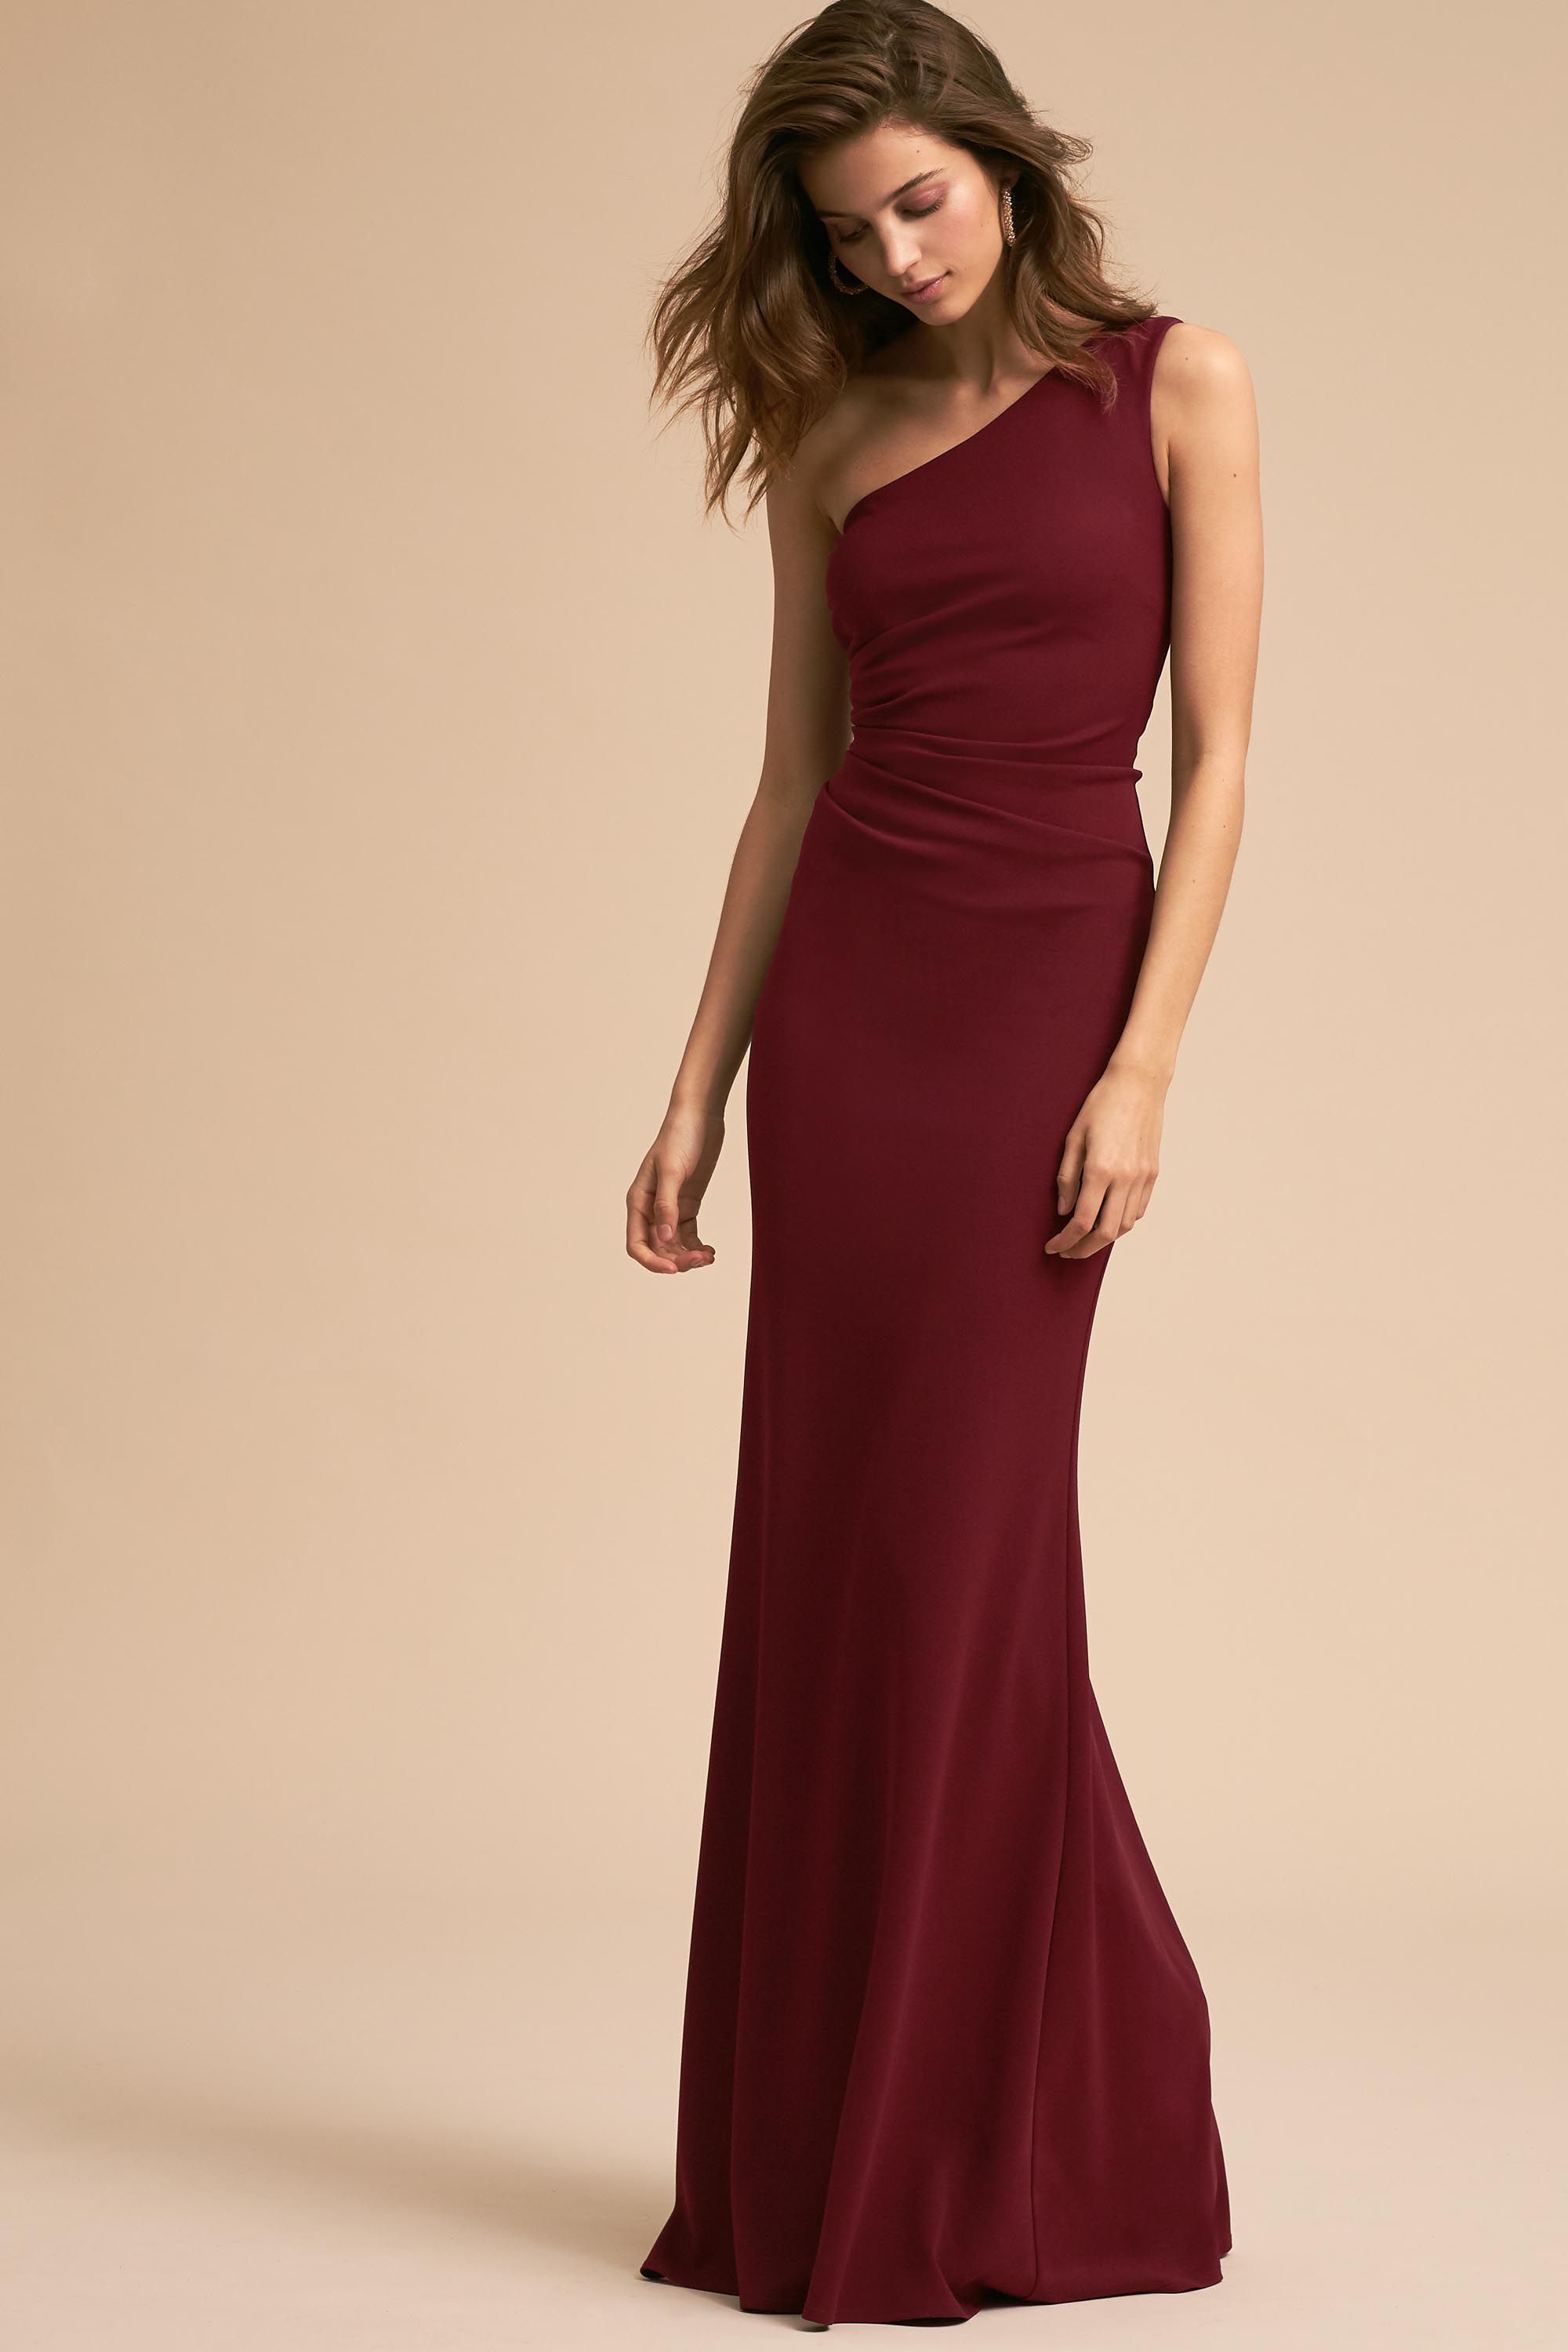 katie may one shoulder gown